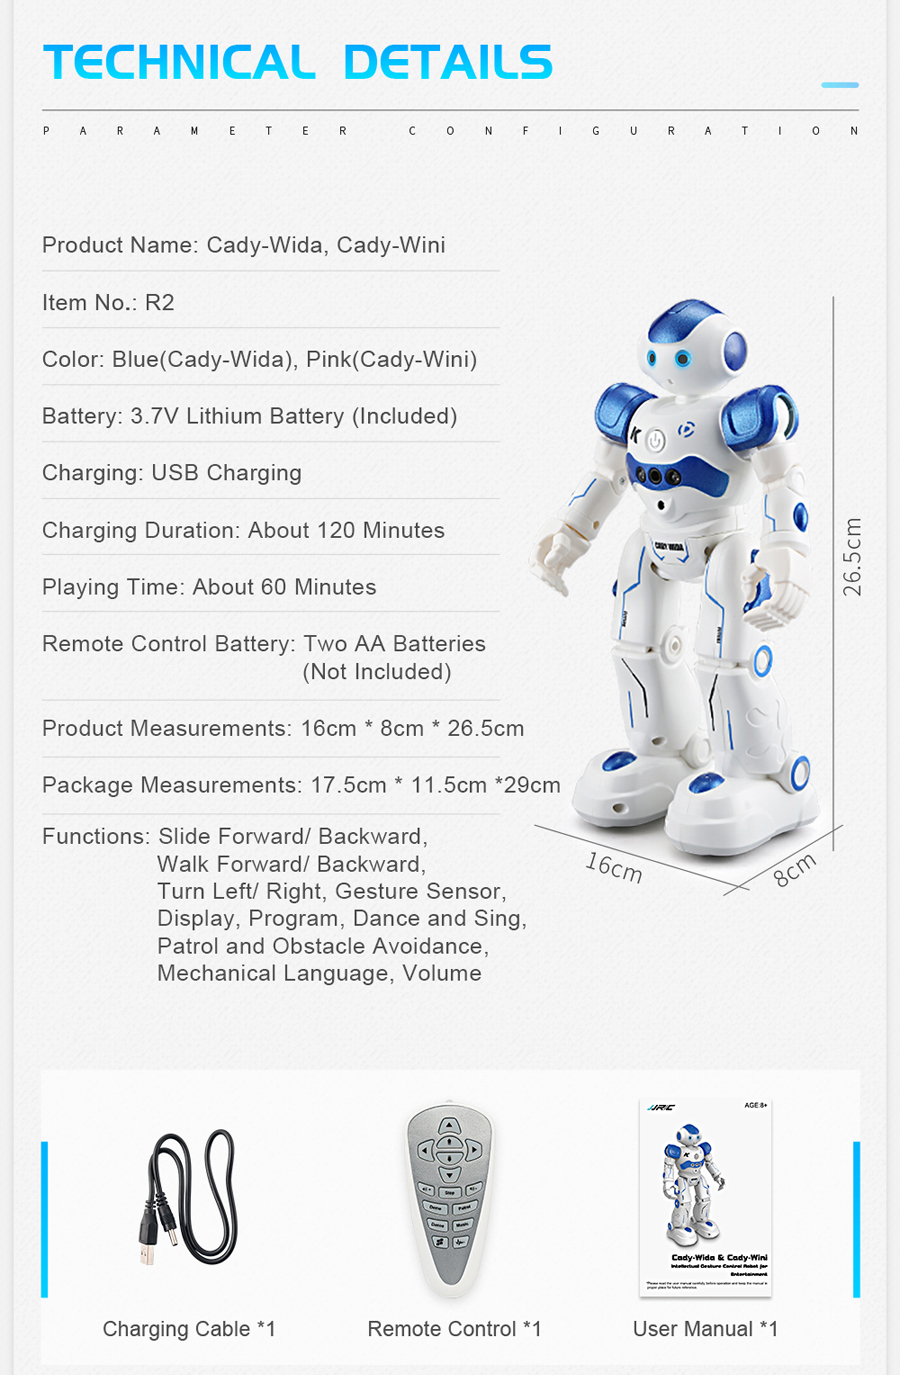 JJRC-R2-Cady-USB-Charging-Dancing-Gesture-Control-Robot-Toy-1181780-10